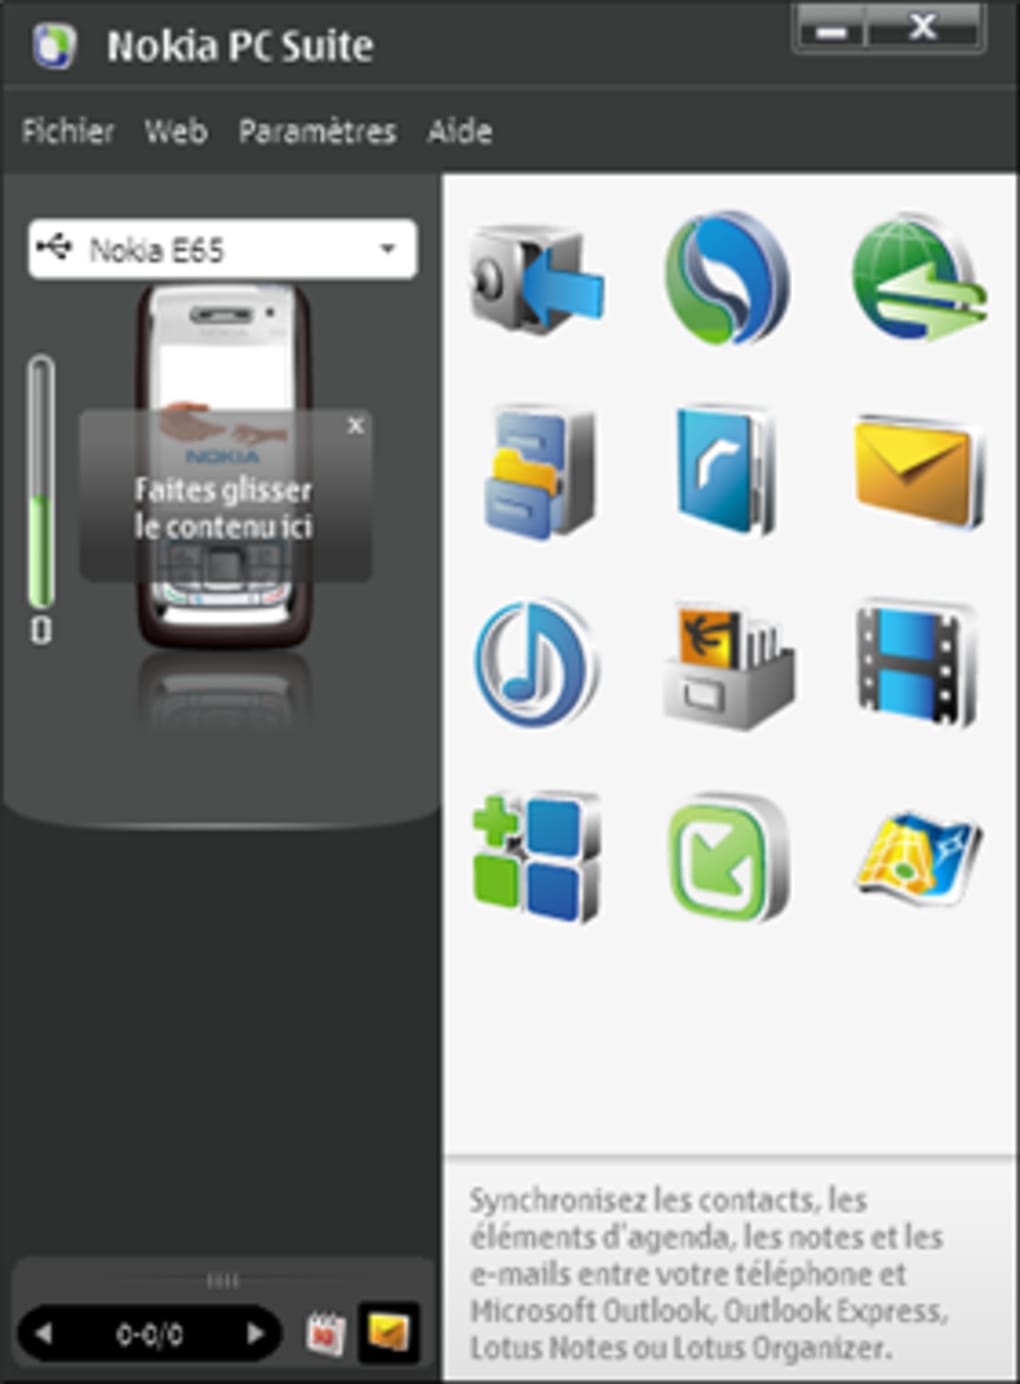 Nokia PC Suite for Android : Nokia PC Suite for Android